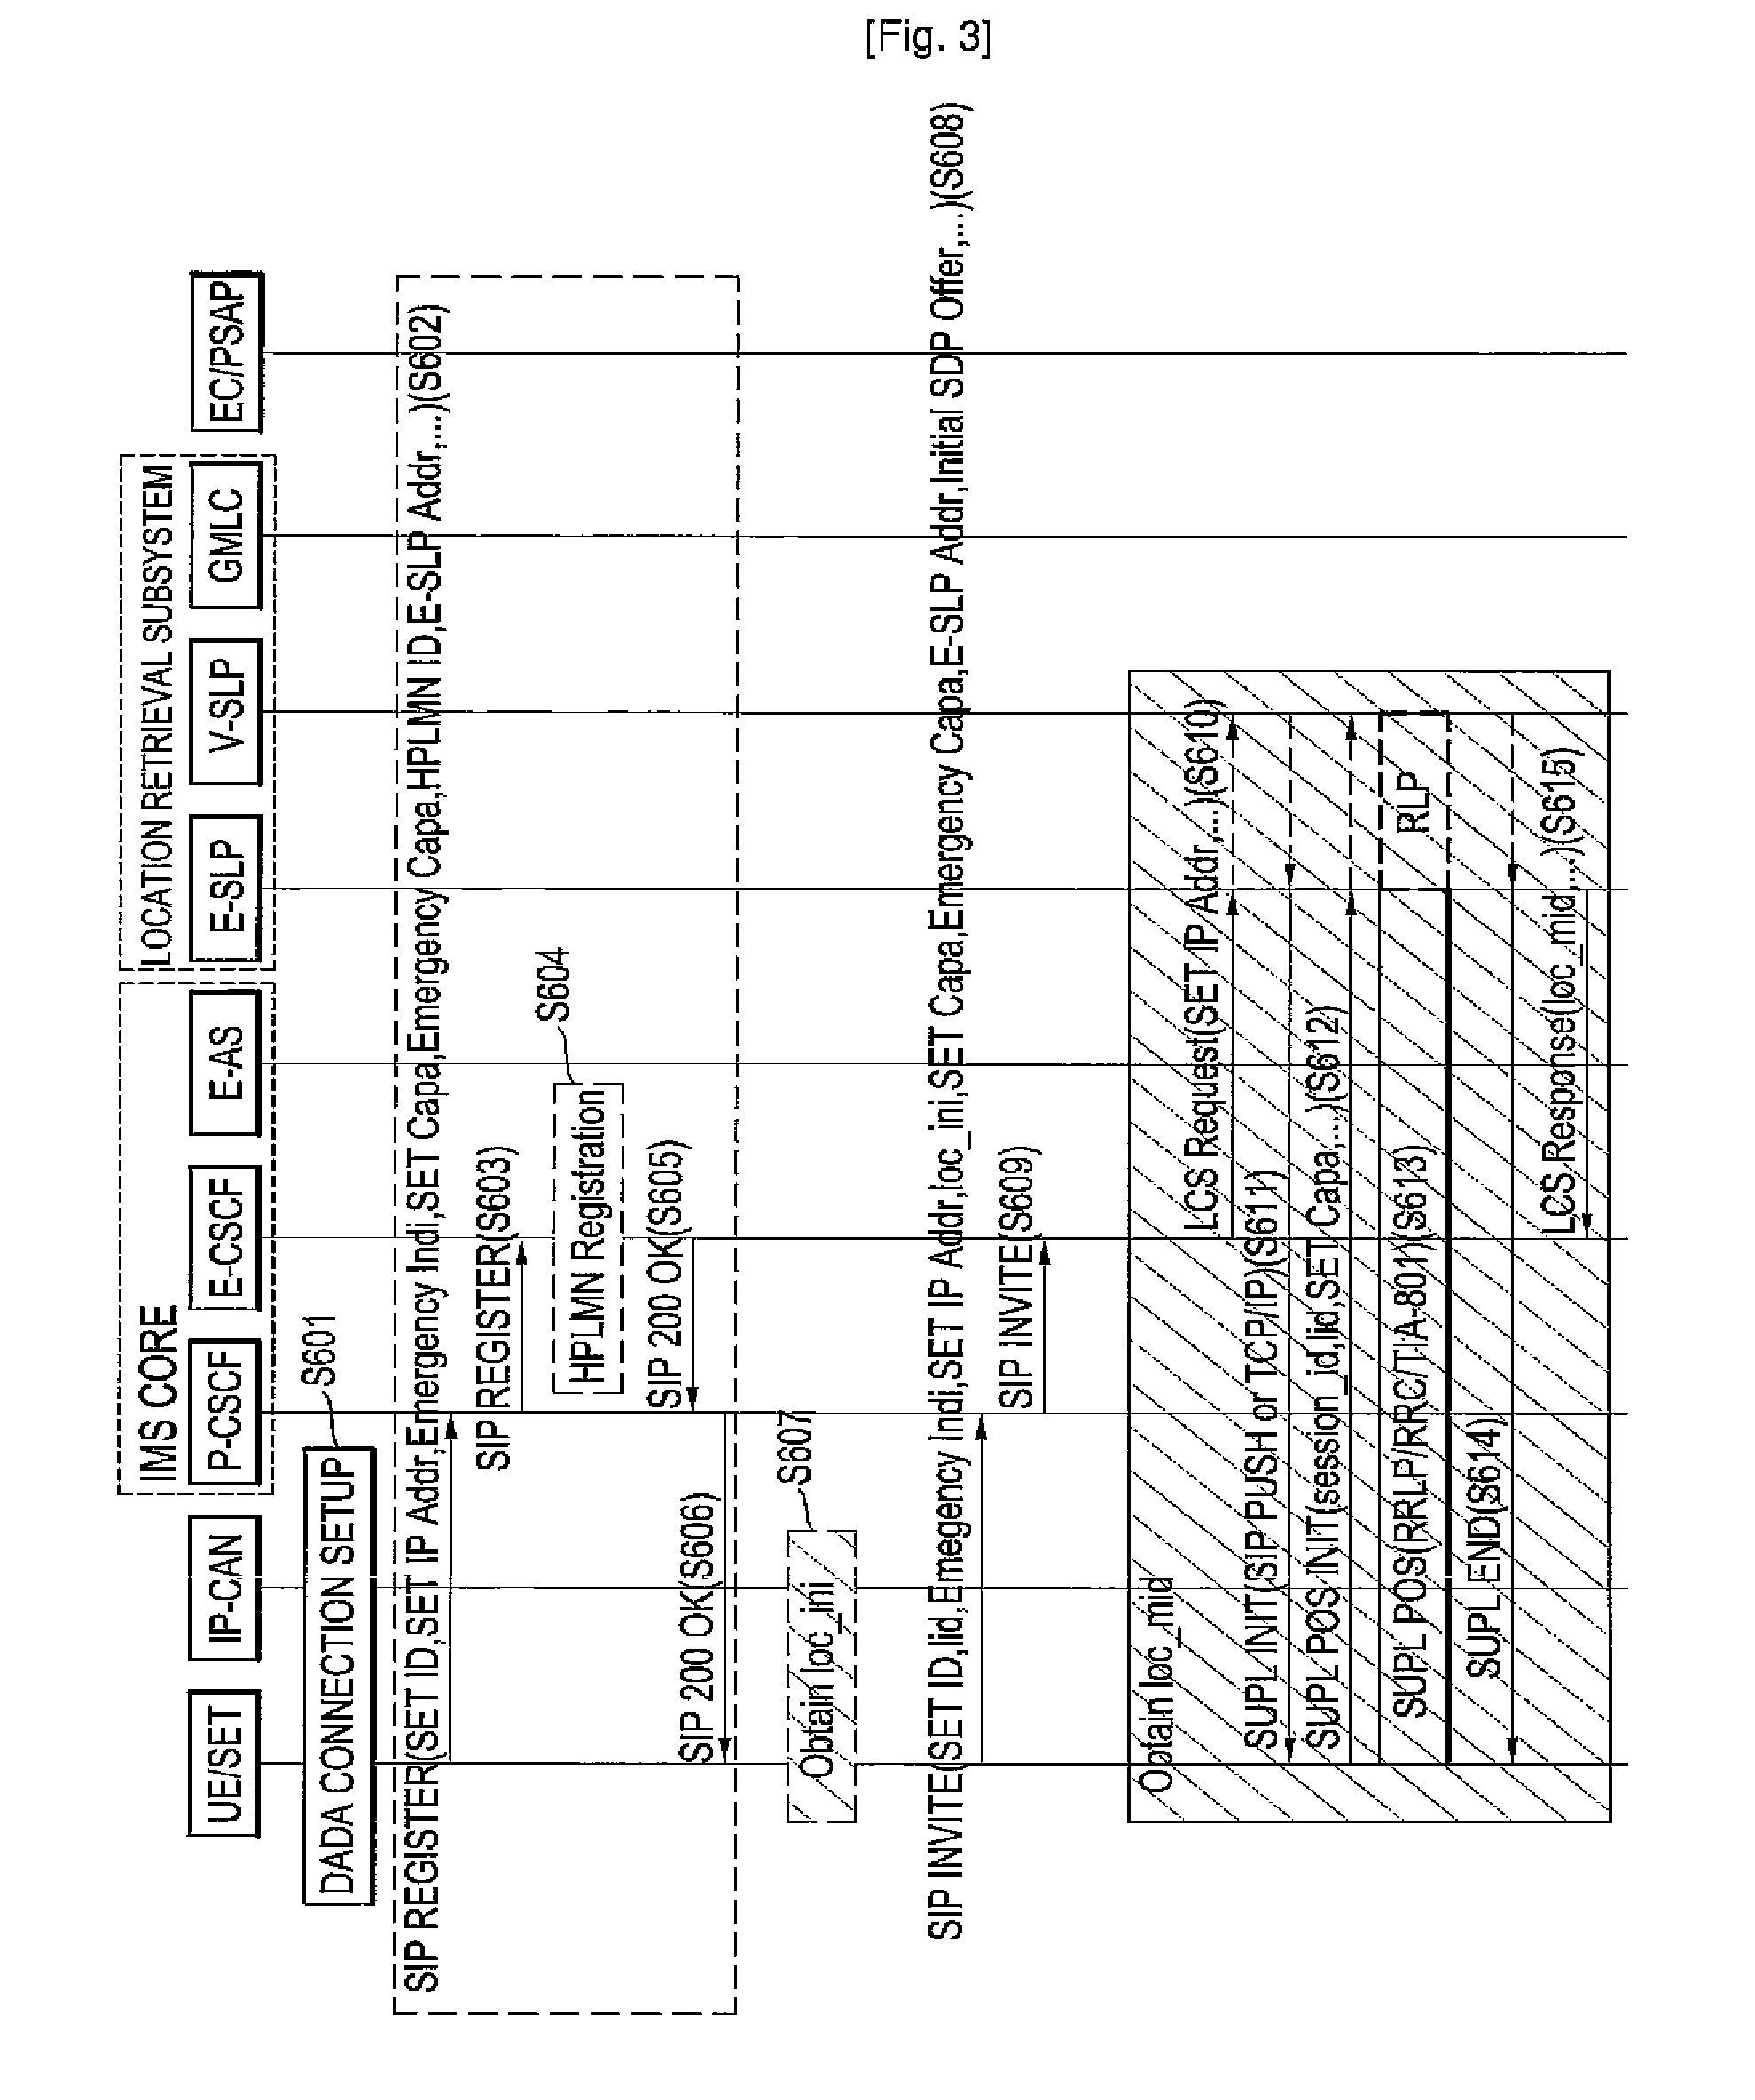 Method and System for Providing an Emergency Location Service